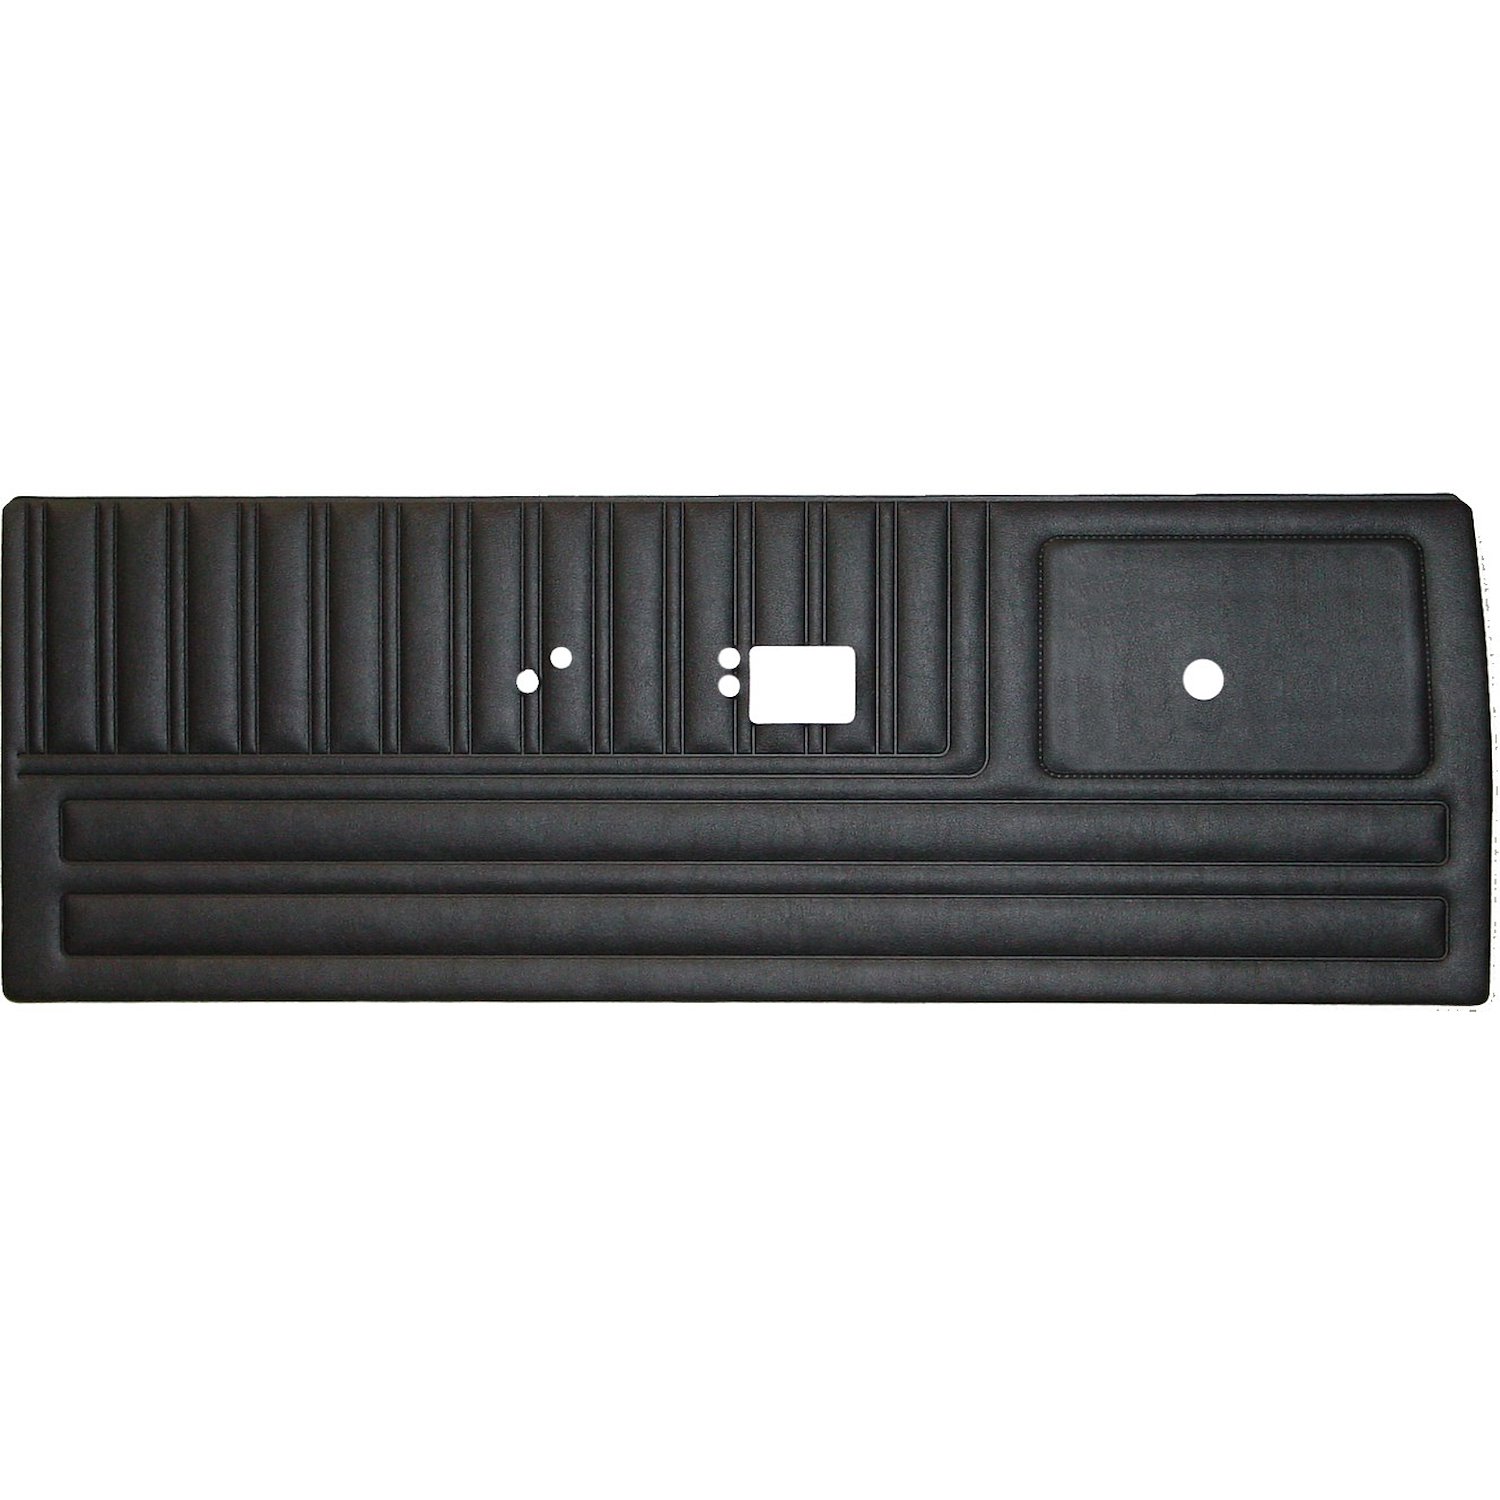 DO70CLD0012100 70 DUSTER BUCKET/BENCH FRONT PANELS - BLACK